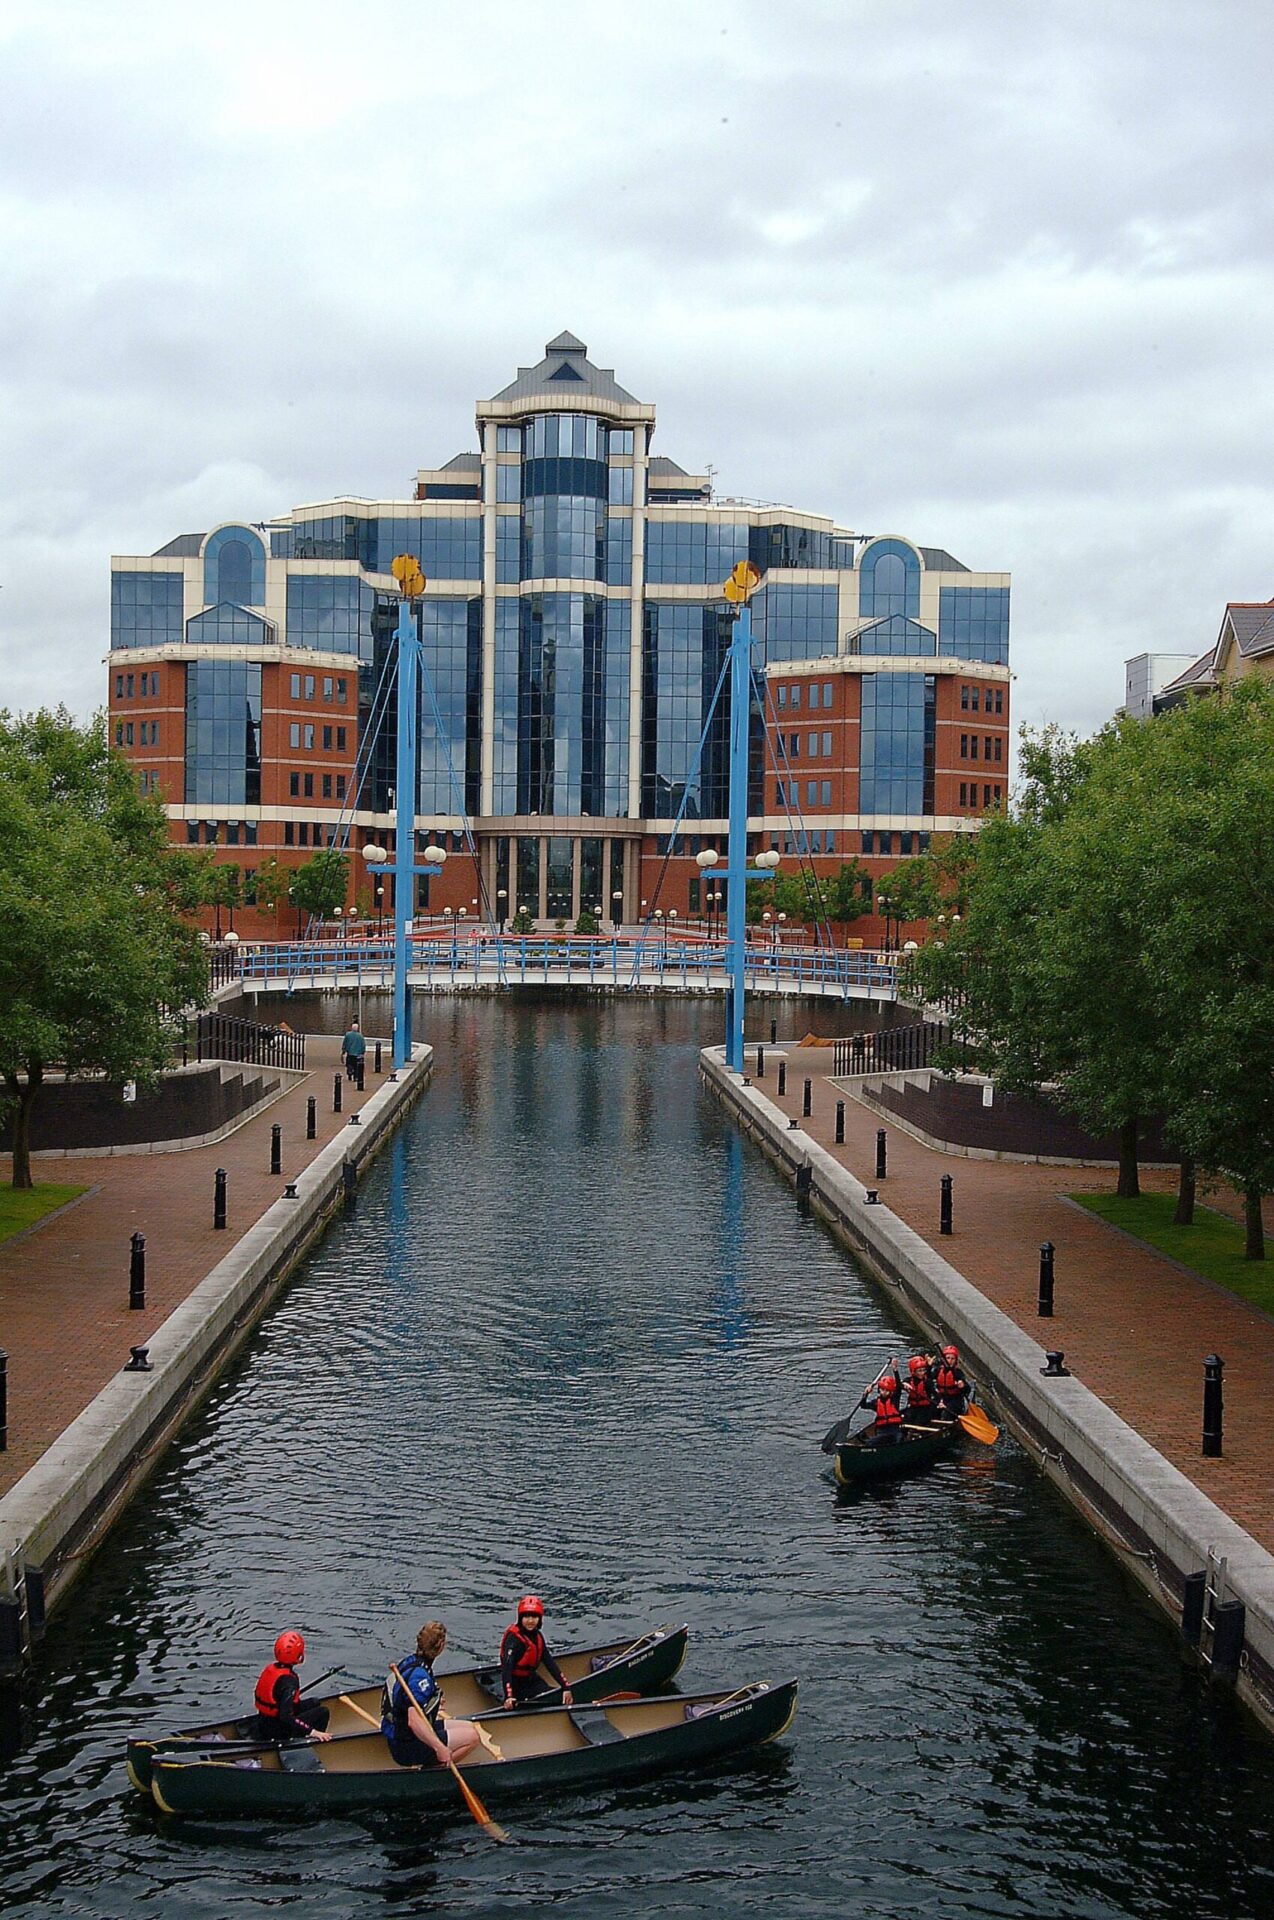  The Victoria at Salford Quays